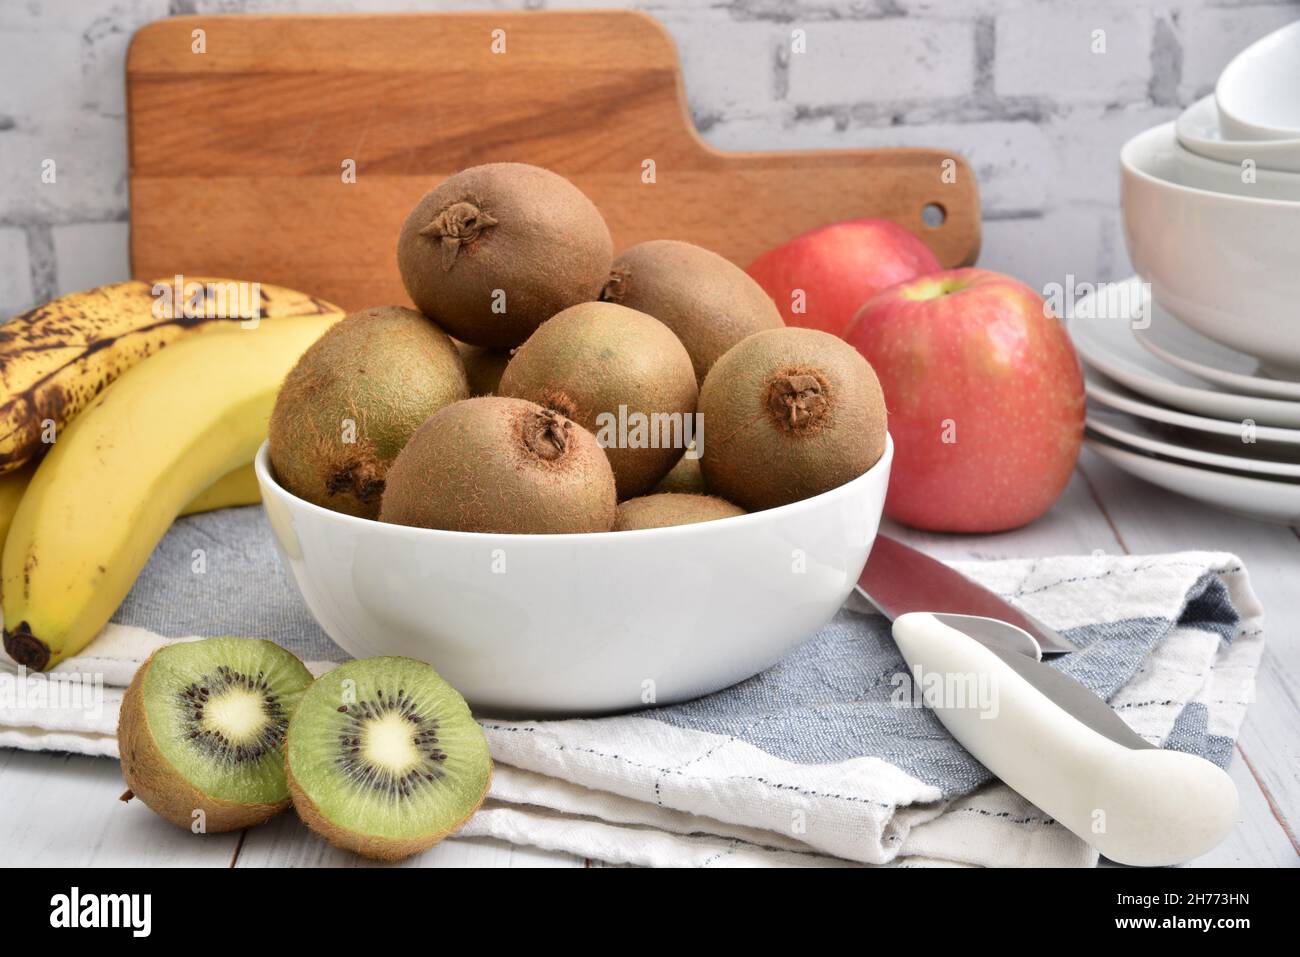 A bowl of kiwi fruit with bananas and apples on wooden kitchen counter Stock Photo